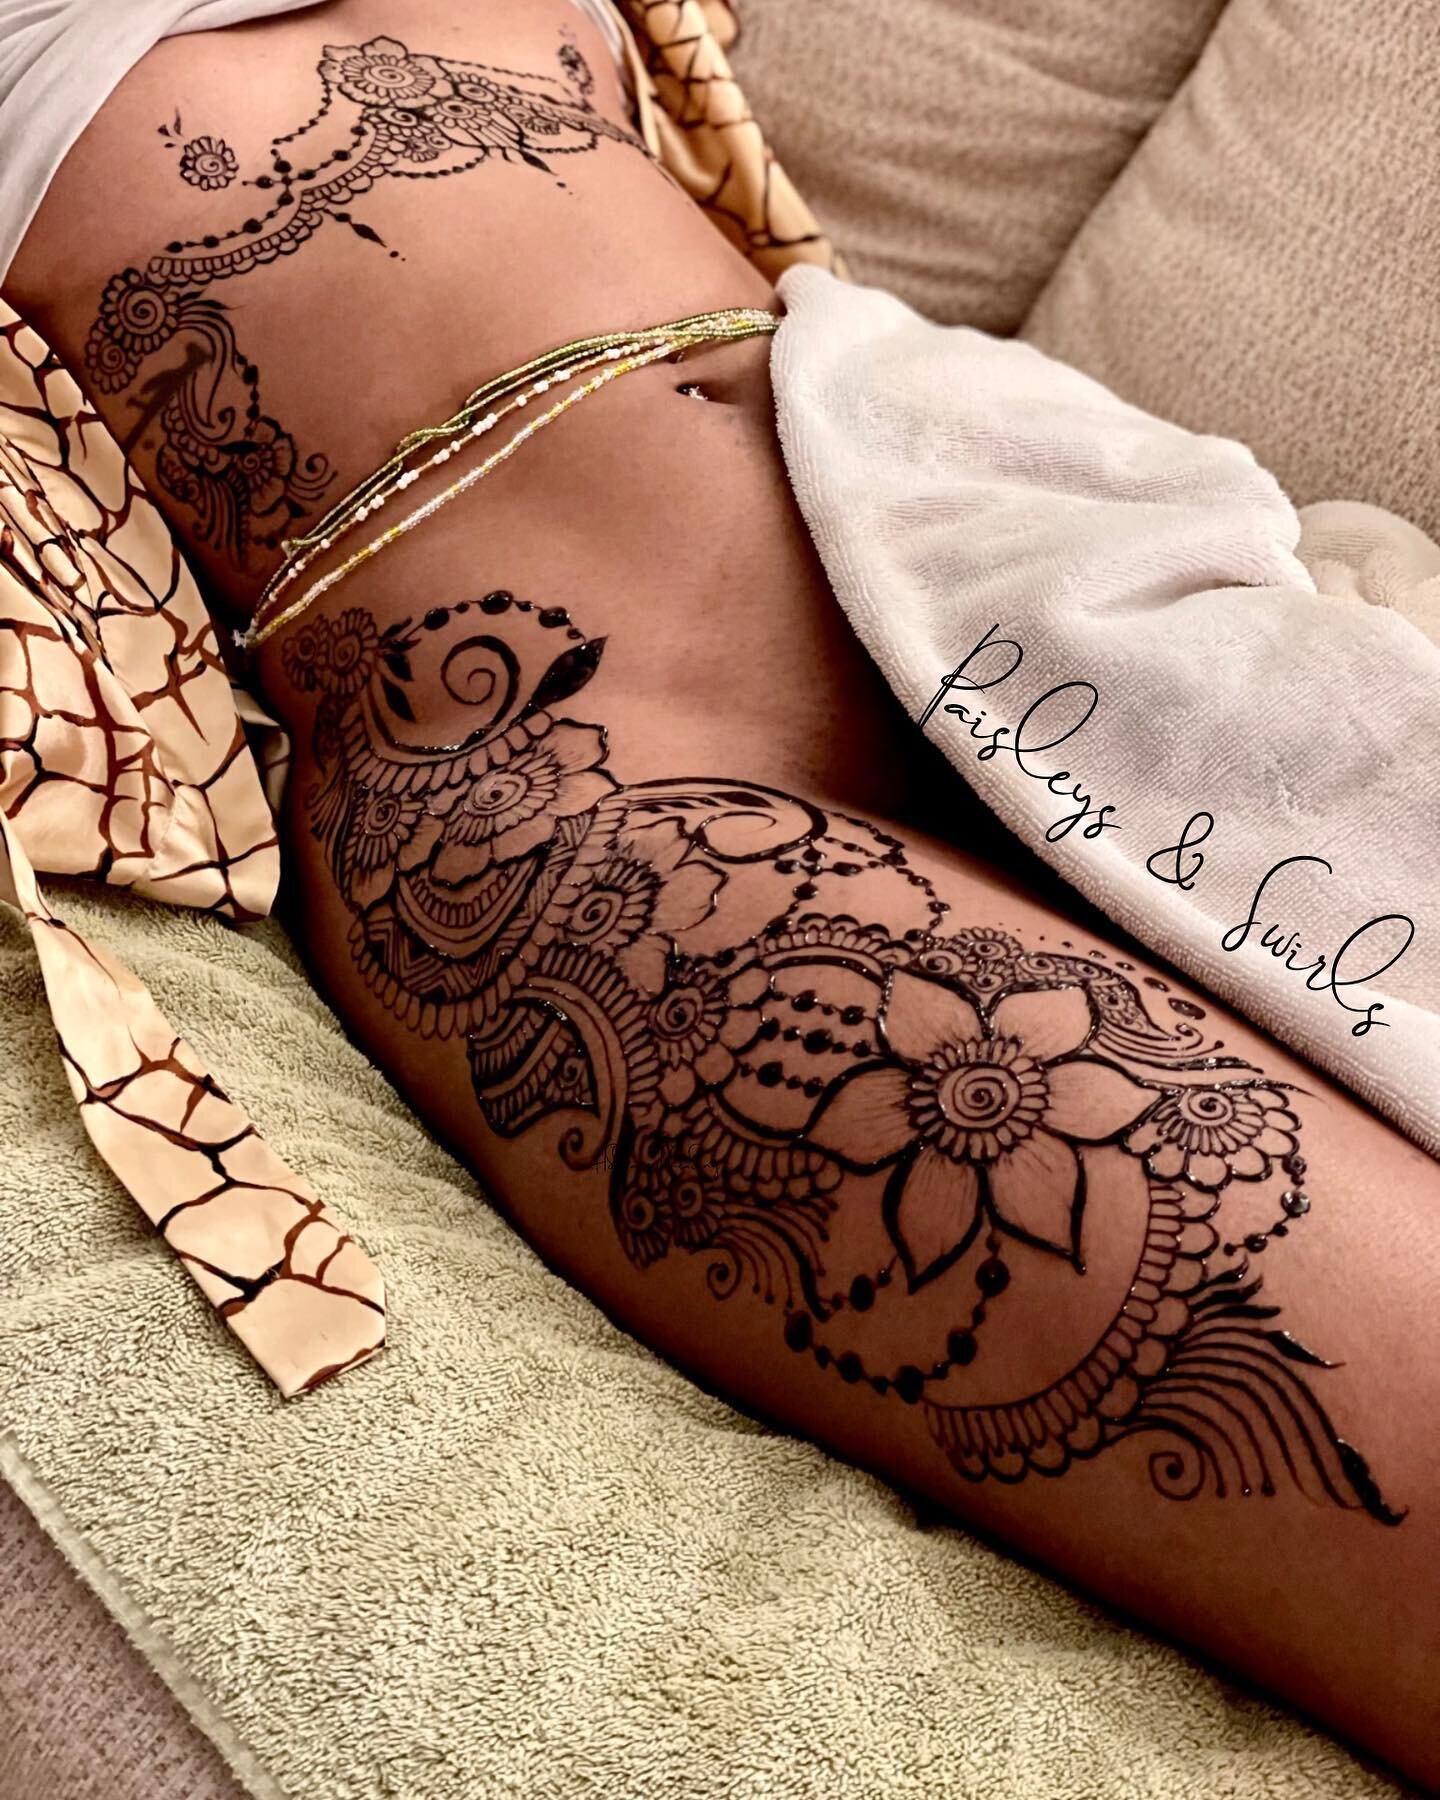 Social media hiatus is over (yes I unofficially took one). More importantly, y&rsquo;all know it&rsquo;s almost hot girl summer time, right? ☀️ and it isn&rsquo;t one without some body art!! Get on that schedule or text to learn more! I&rsquo;m excit